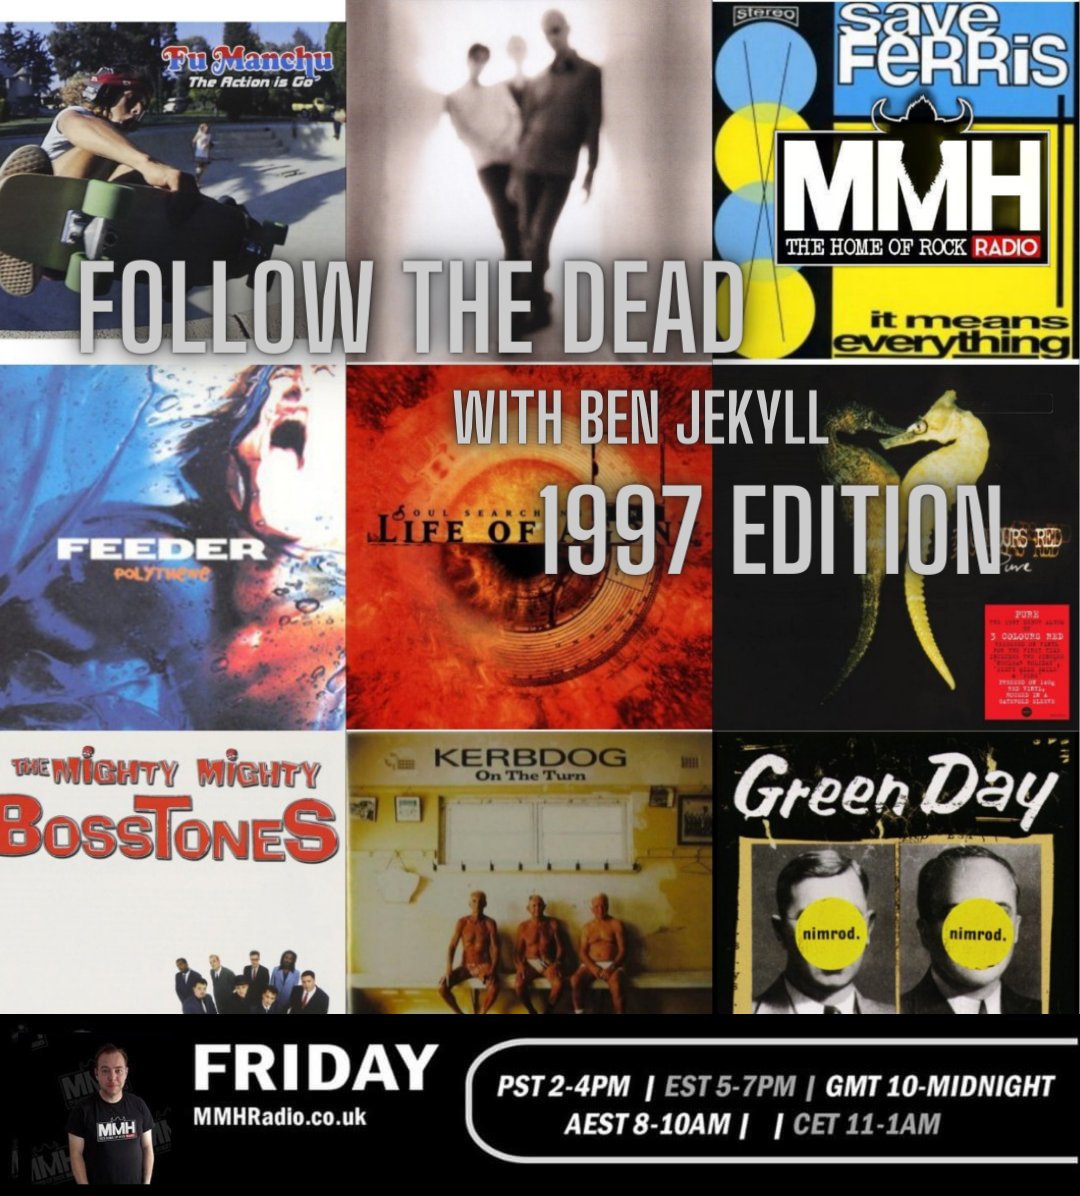 Join @ben_jekyll from 10pm for this week's Follow The Dead as we go back to 1997 with music from @sav_ferris @mmbosstones @offspring @GreenDay #a @AFI @smashmouth @themisfits @FeederHQ @EverclearBand Website/smart speaker/free app Search for/ask to play/download MMH Radio